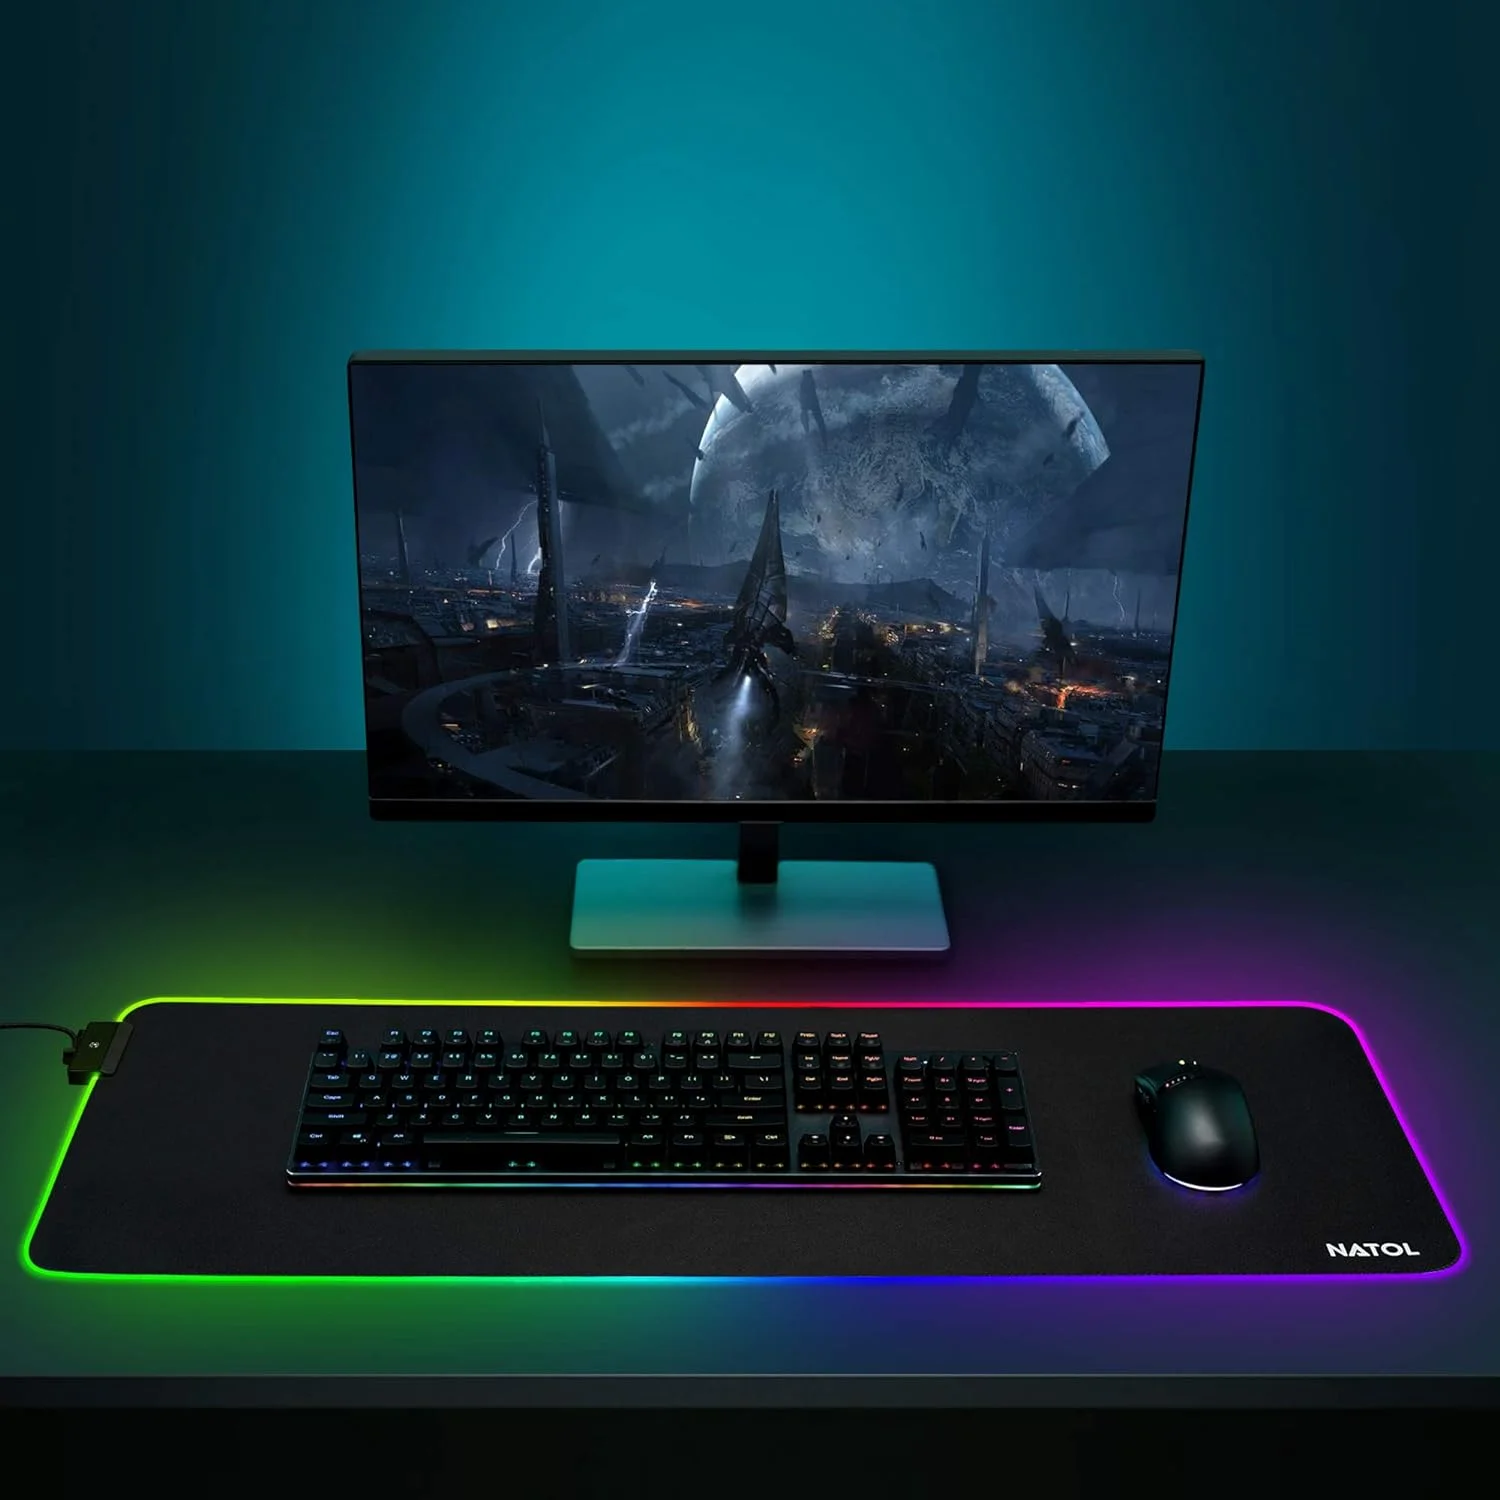 NATOL NT-MP02 RGB Extended Large Gaming Mouse Mat